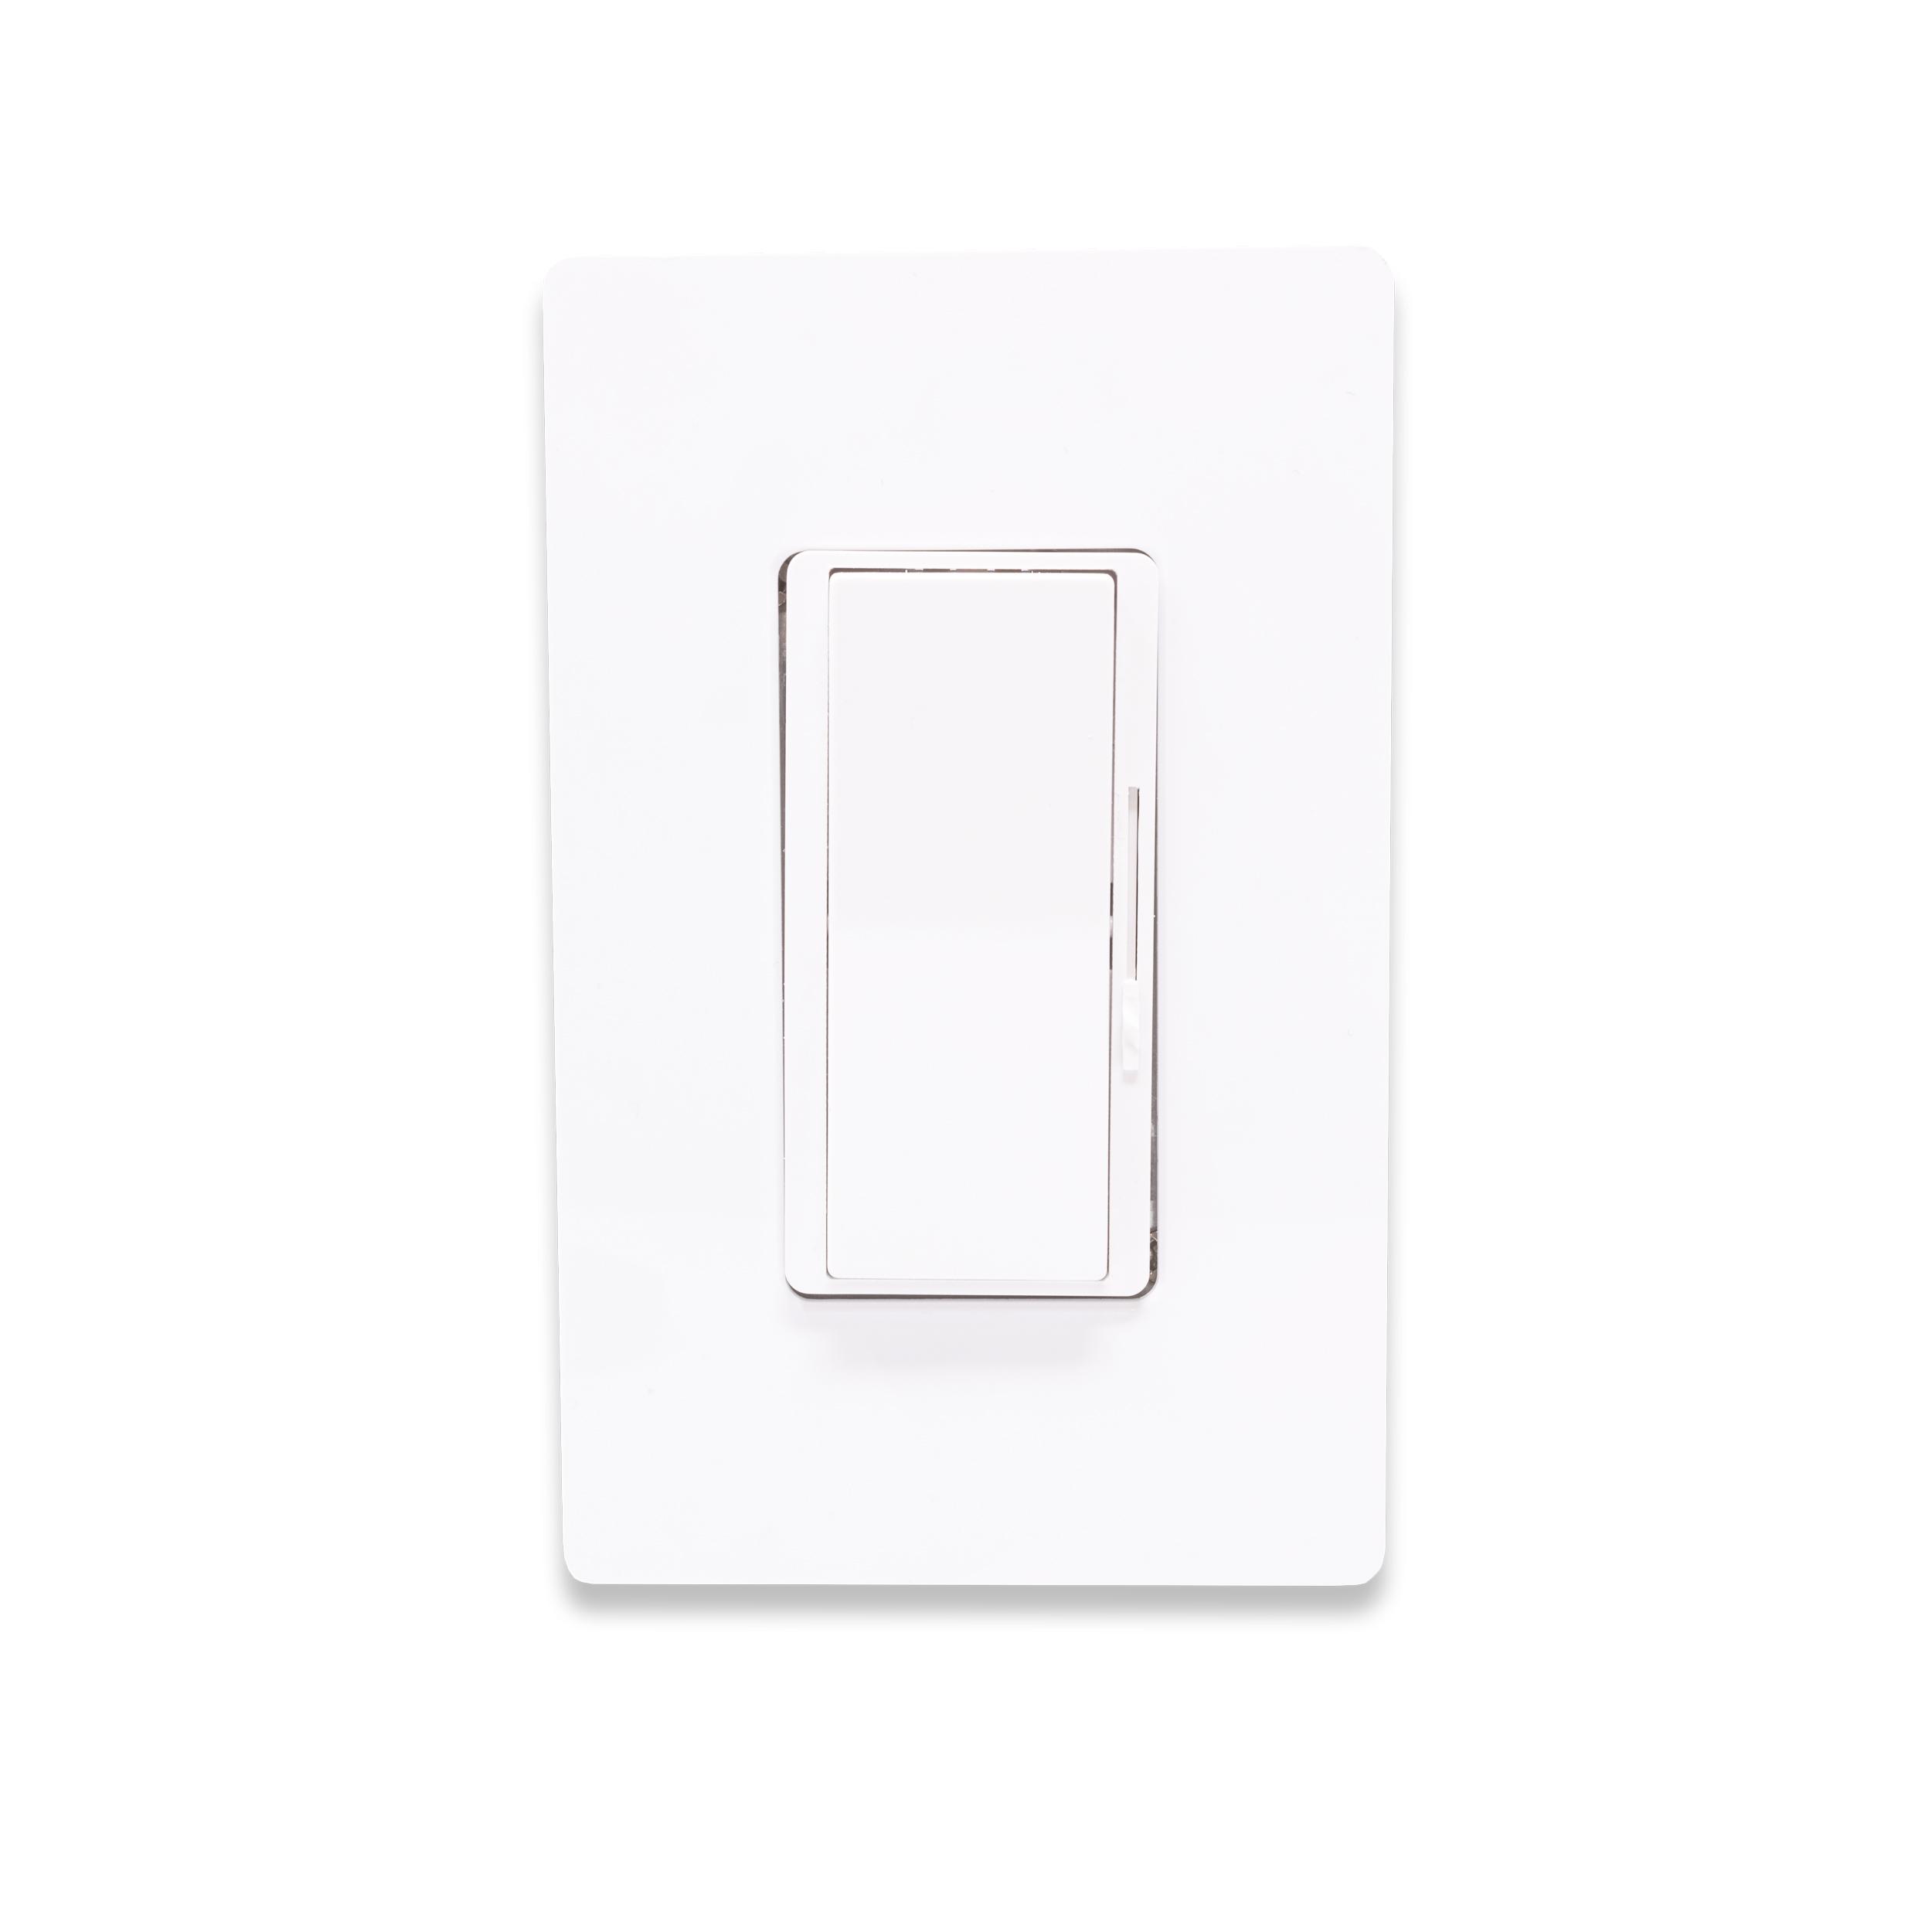 REIGN® Low-Voltage Dimmer Switch